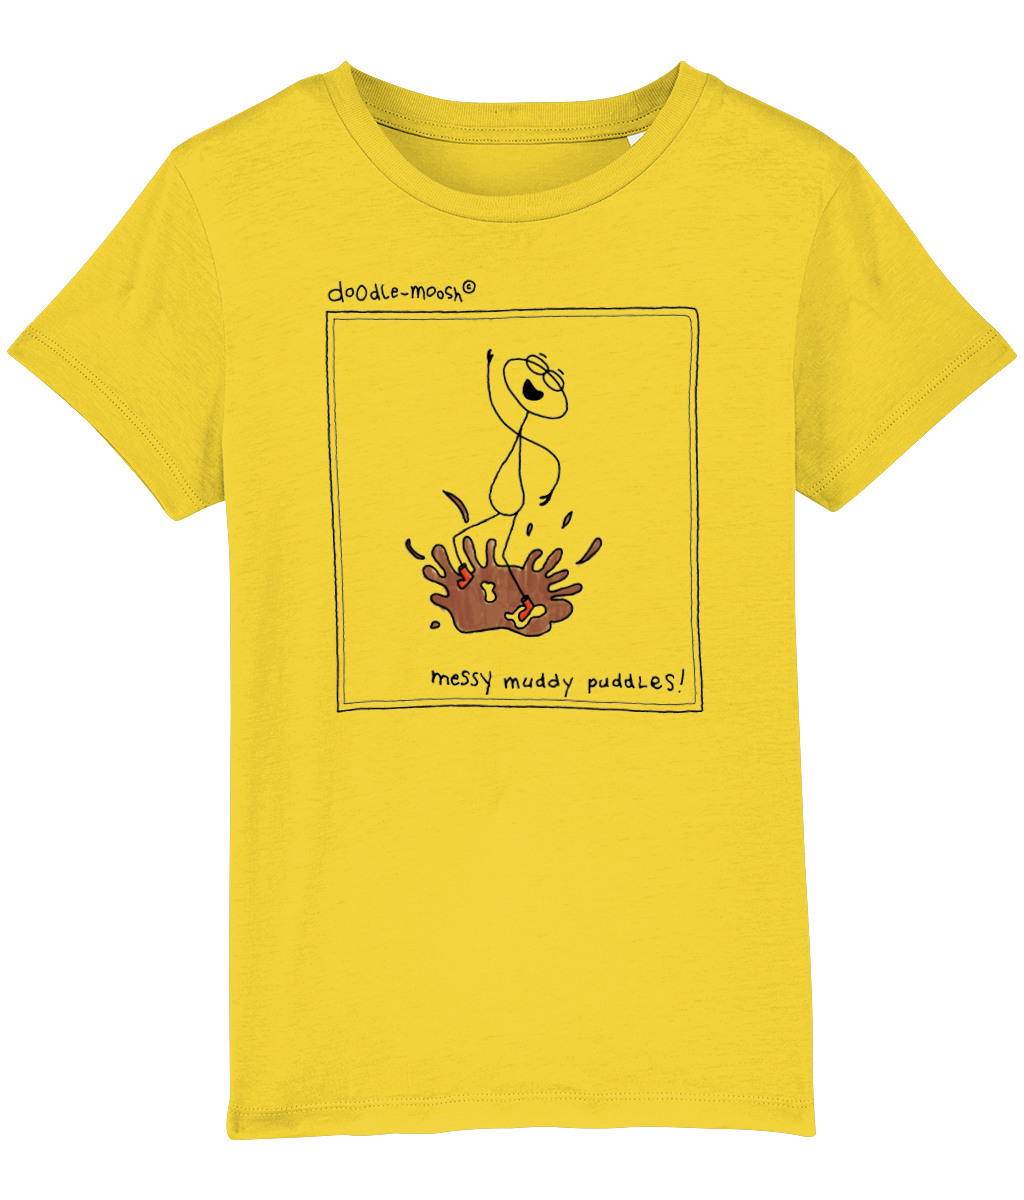 Messy muddy puddles t-shirt, yellow with black, colourful drawings